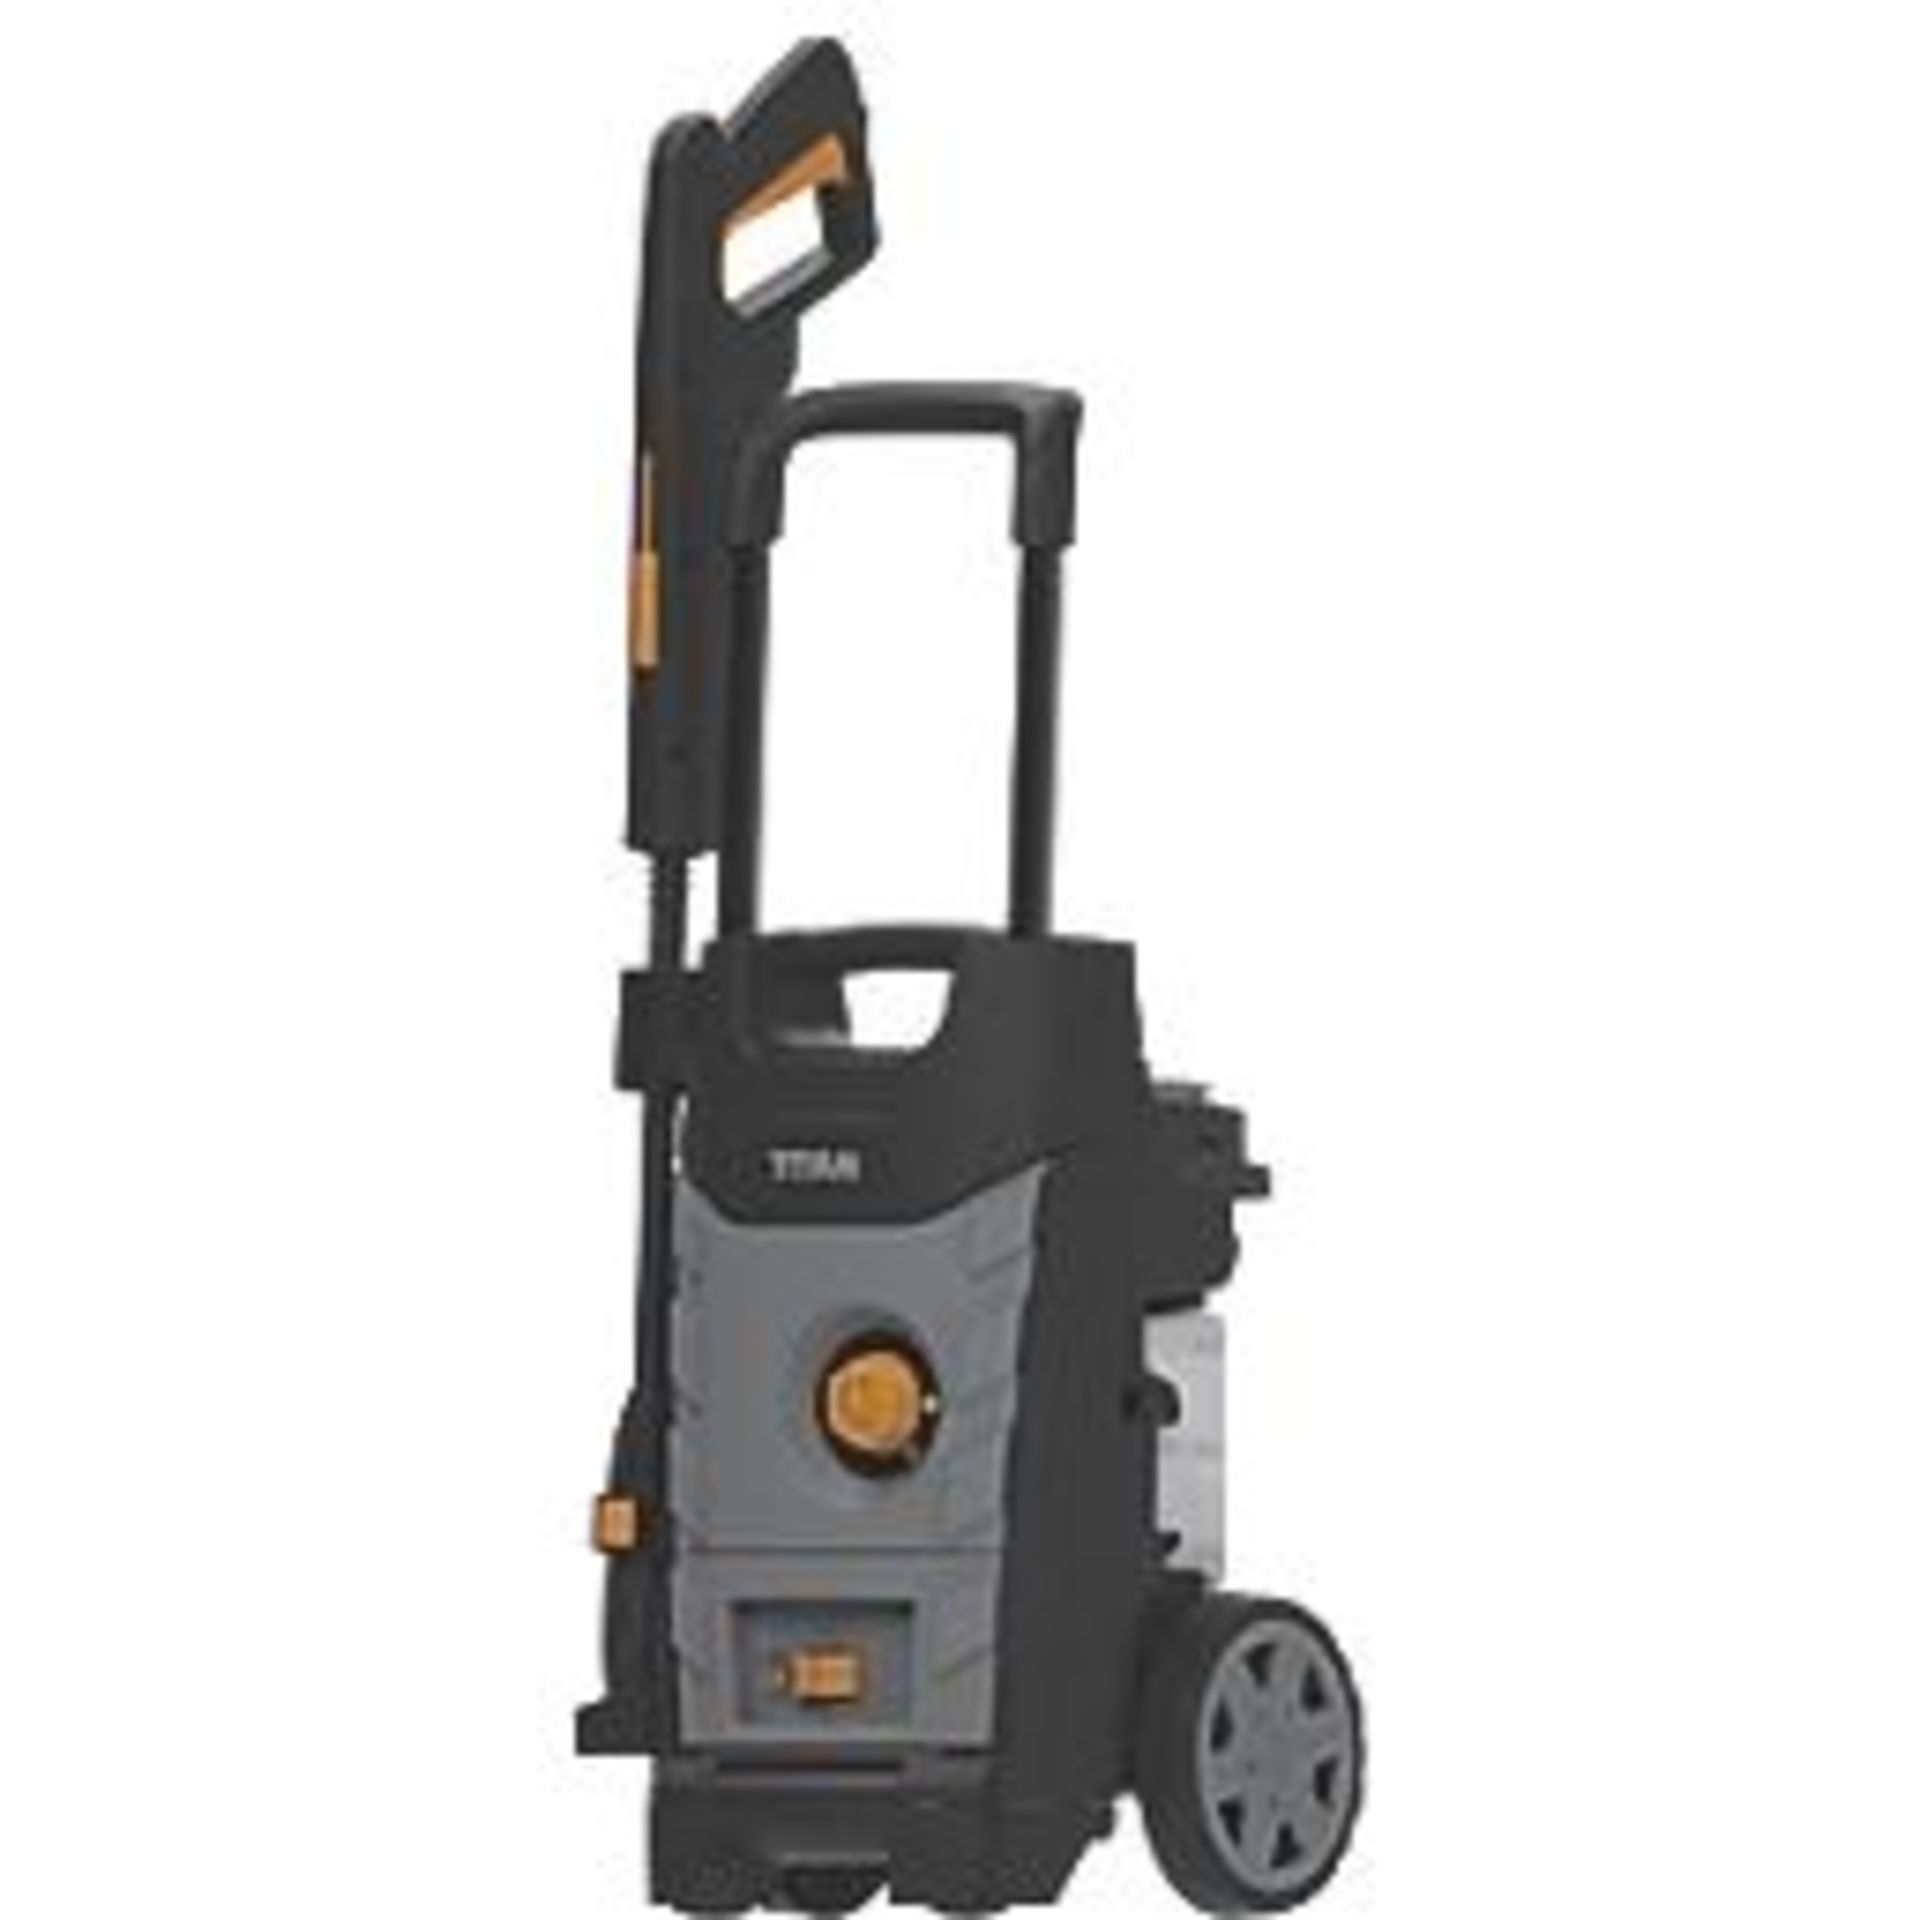 TITAN TTB1800PRW 140BAR ELECTRIC HIGH PRESSURE WASHER 1.8KW 230V. - PW. Compact design with space-